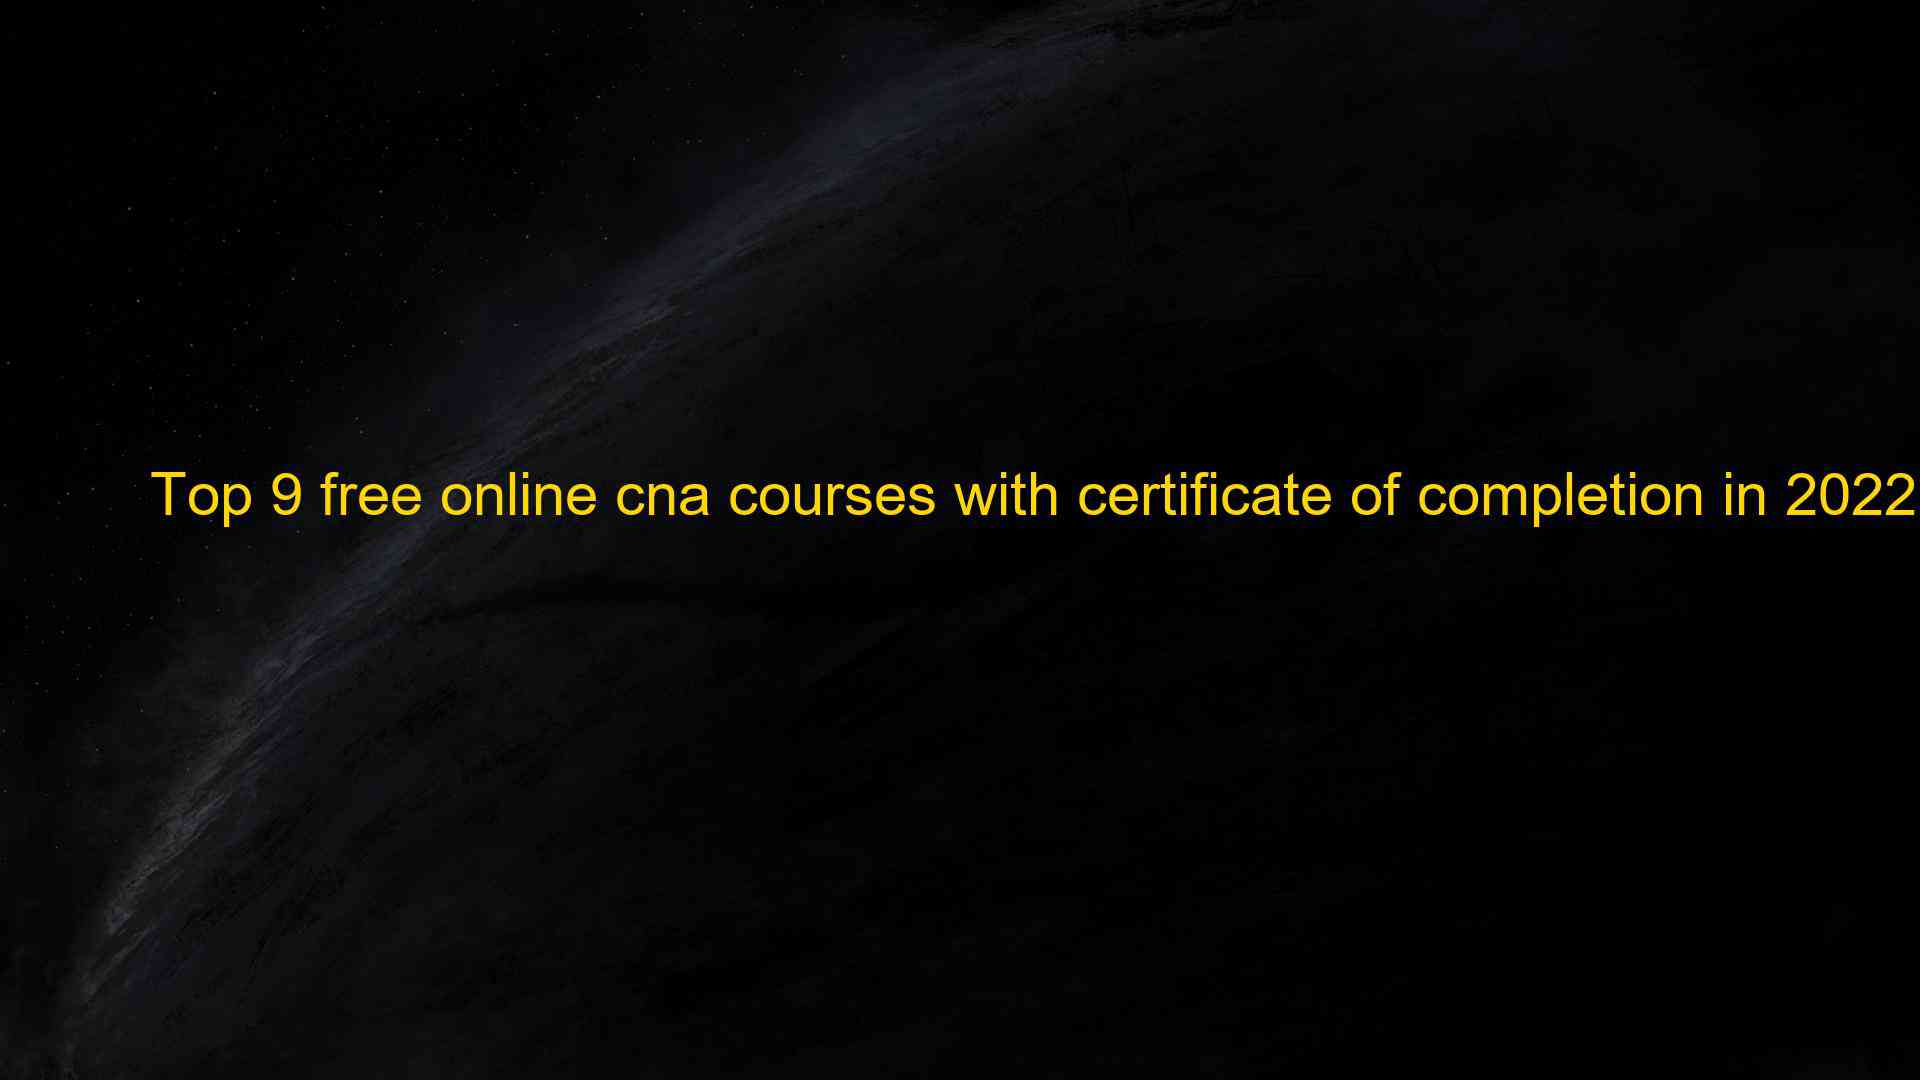 Top 9 free online cna courses with certificate of completion in 2022 1661839138